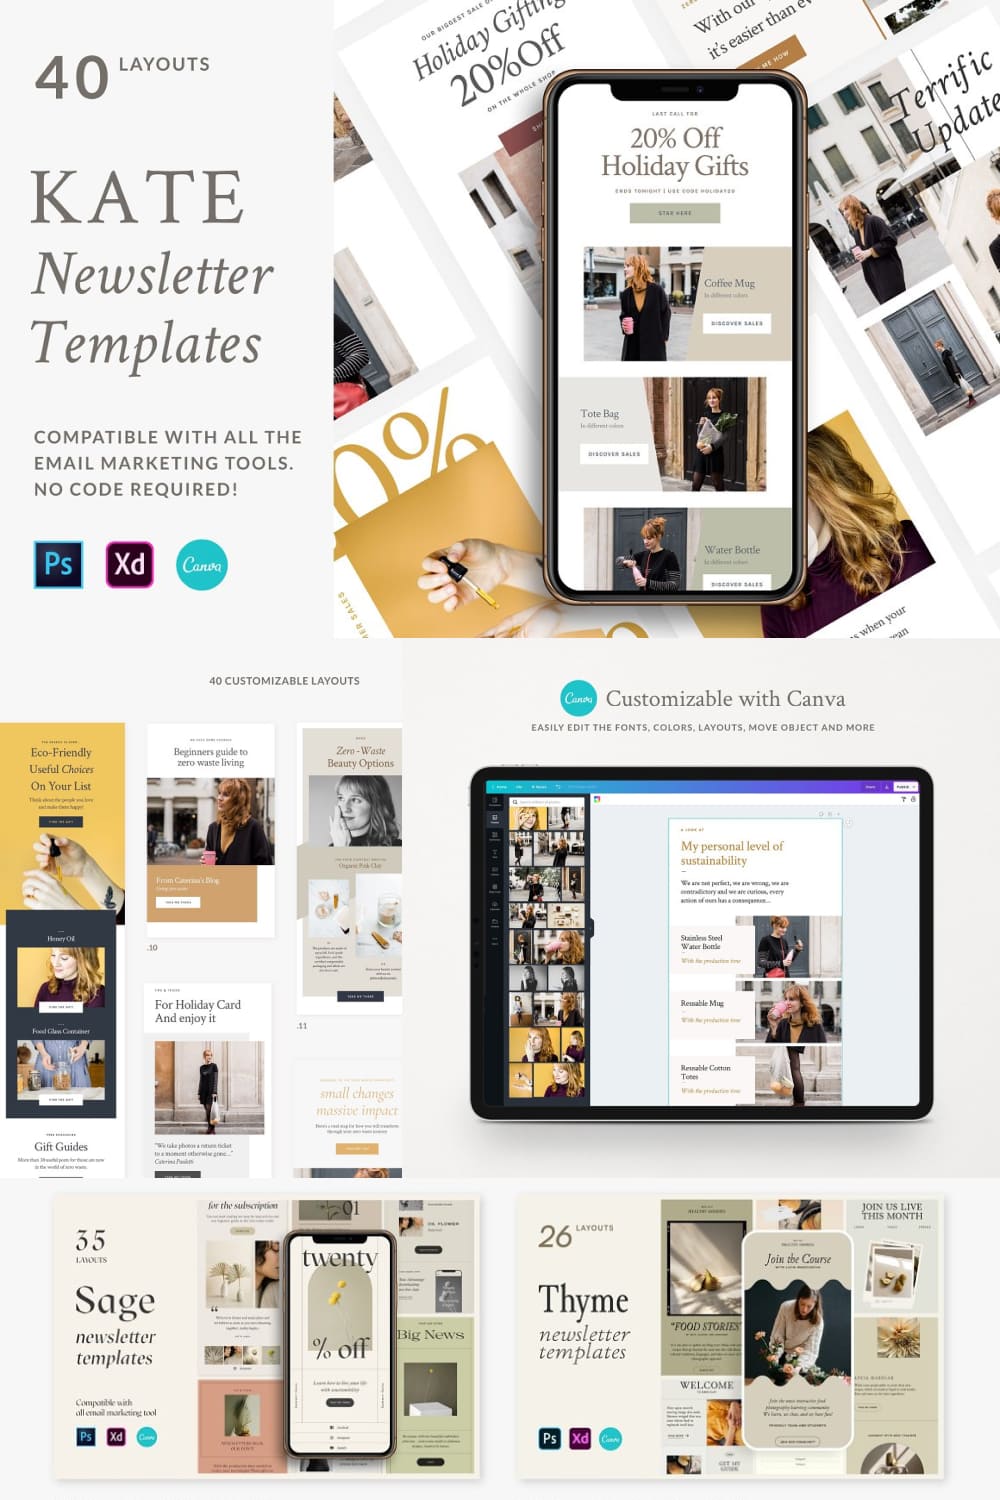 kate newsletter templates 1000x1500 155